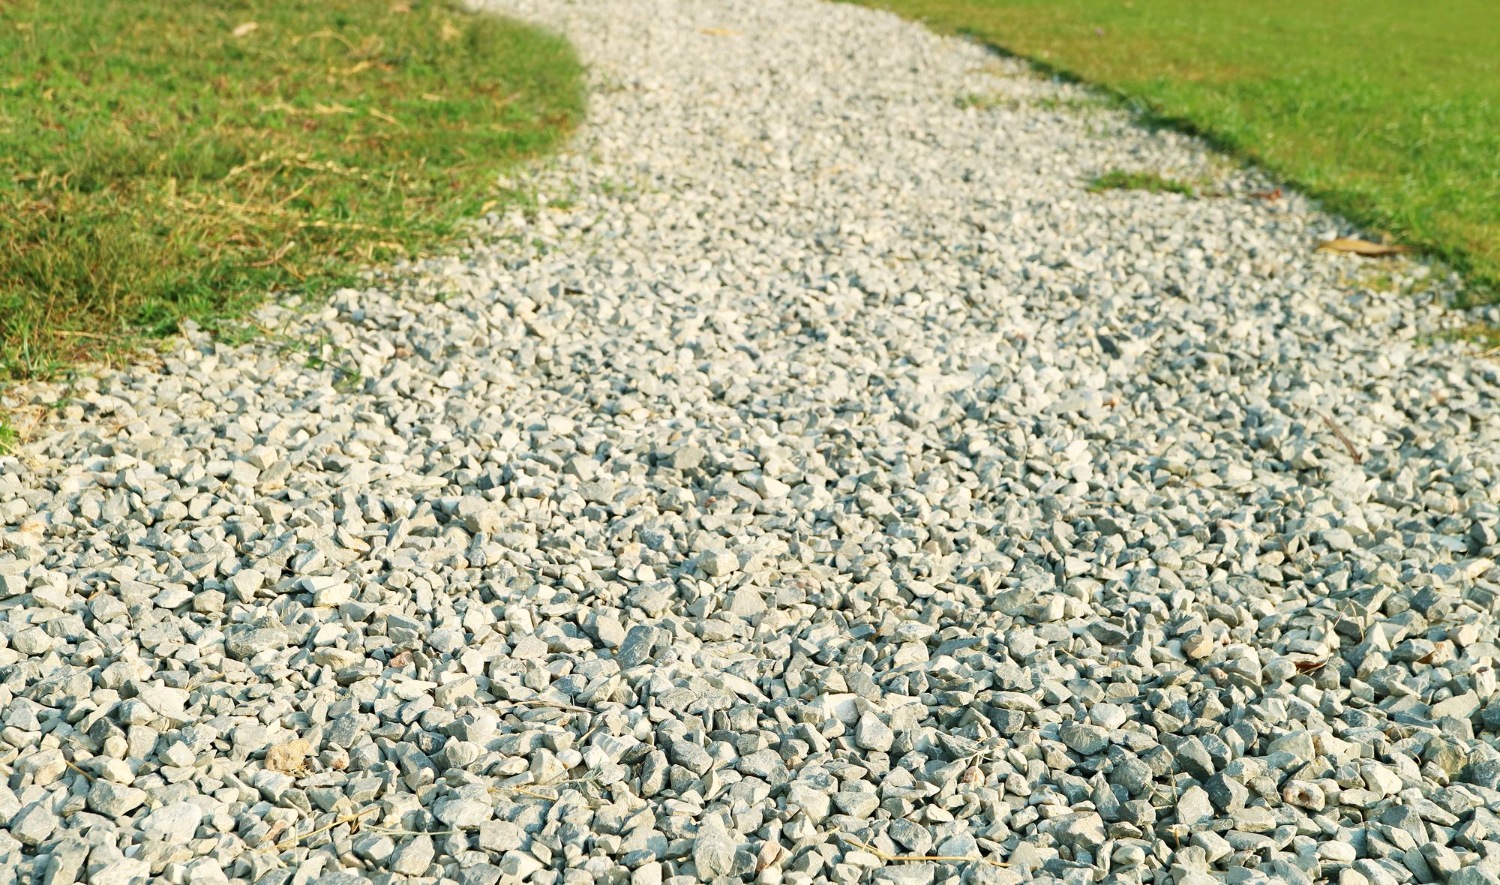 How to Lay a Gravel Driveway? | Step-By-Step Guide